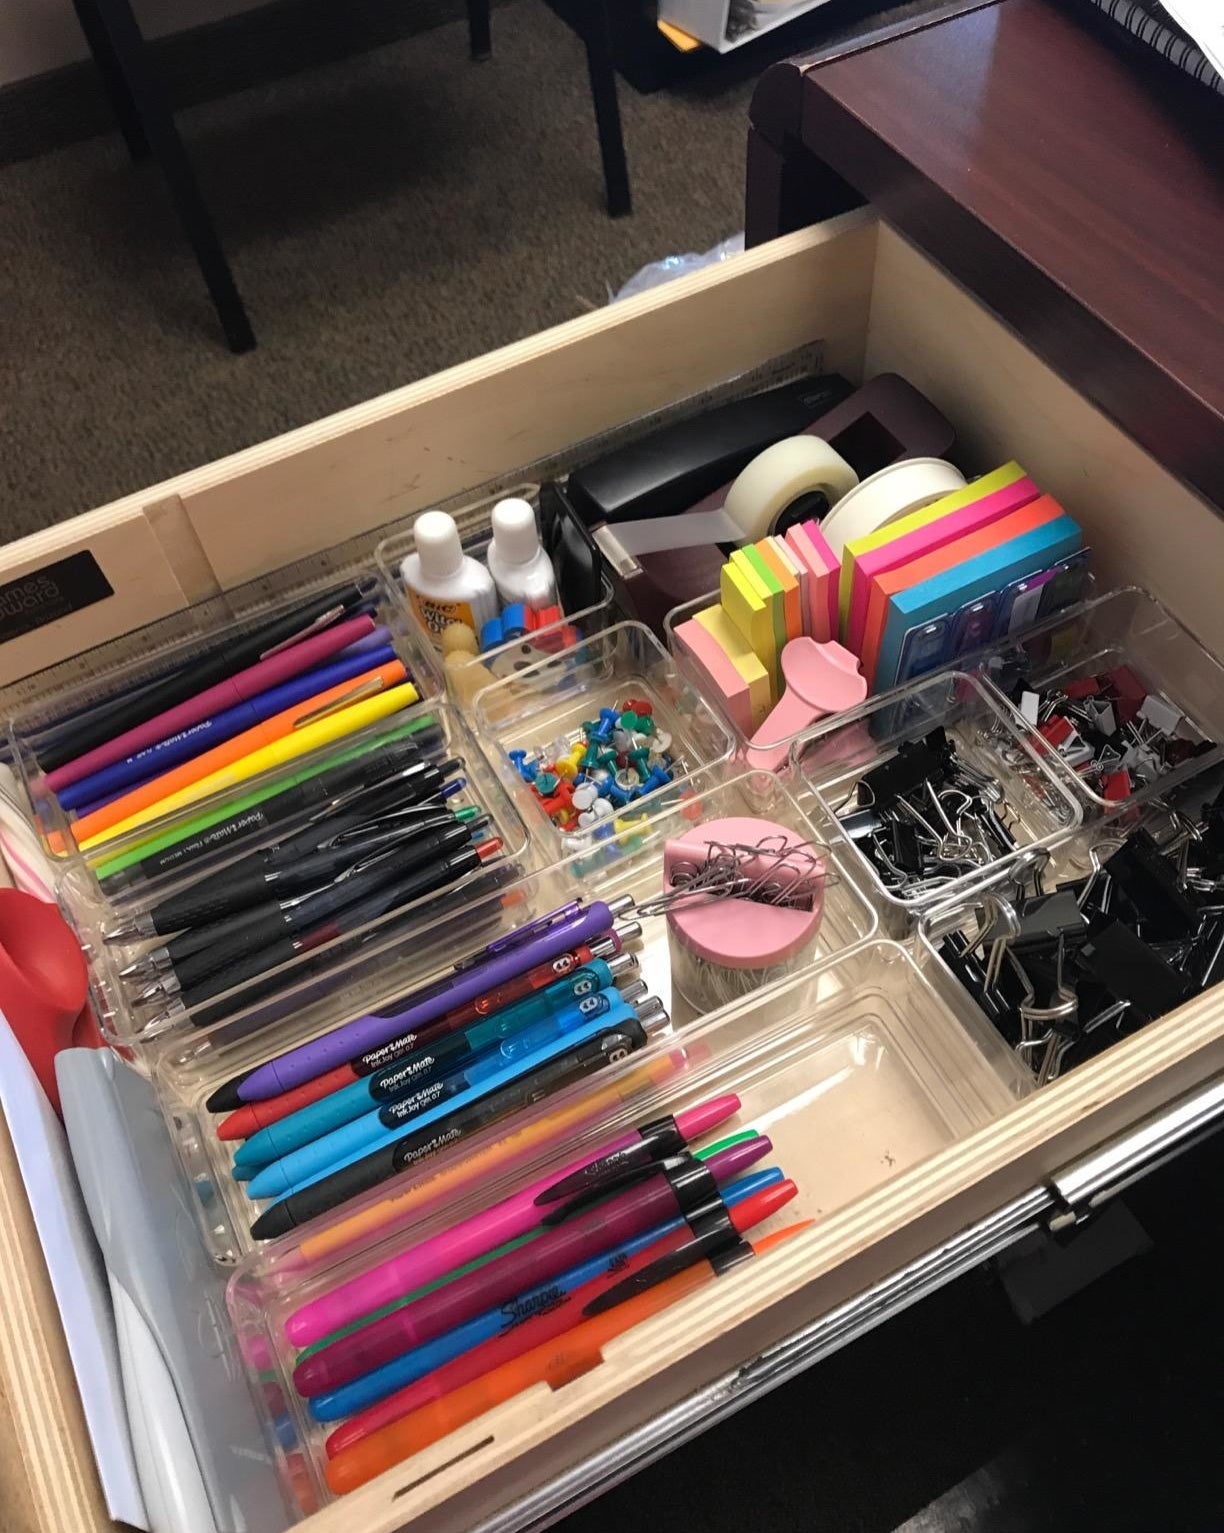 45 Things To Get If Disorganization Gets On Your Last Nerves